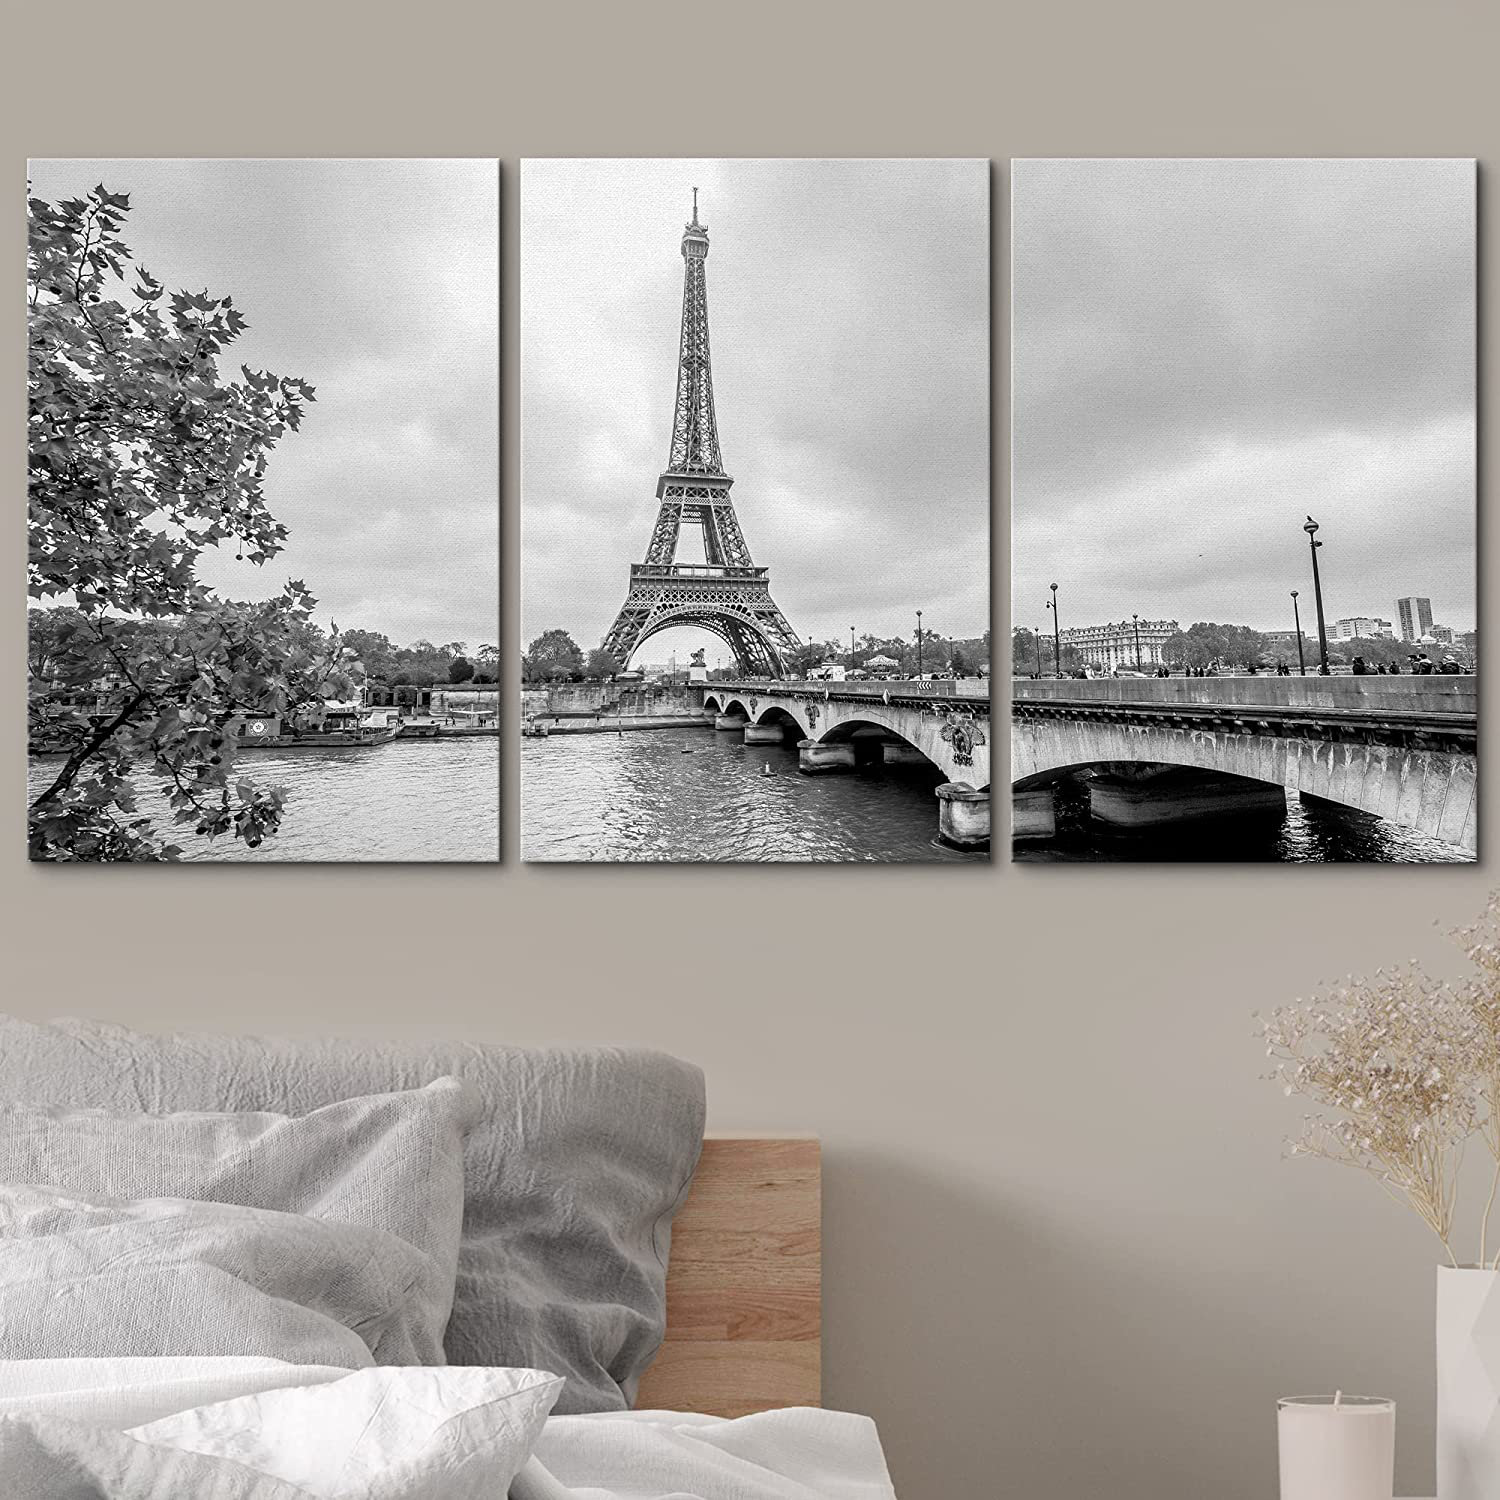 And In | From Seine. Cityscape Tower Eiffel Black Canvas 3 IDEA4WALL Pieces Print On White Wayfair Paris